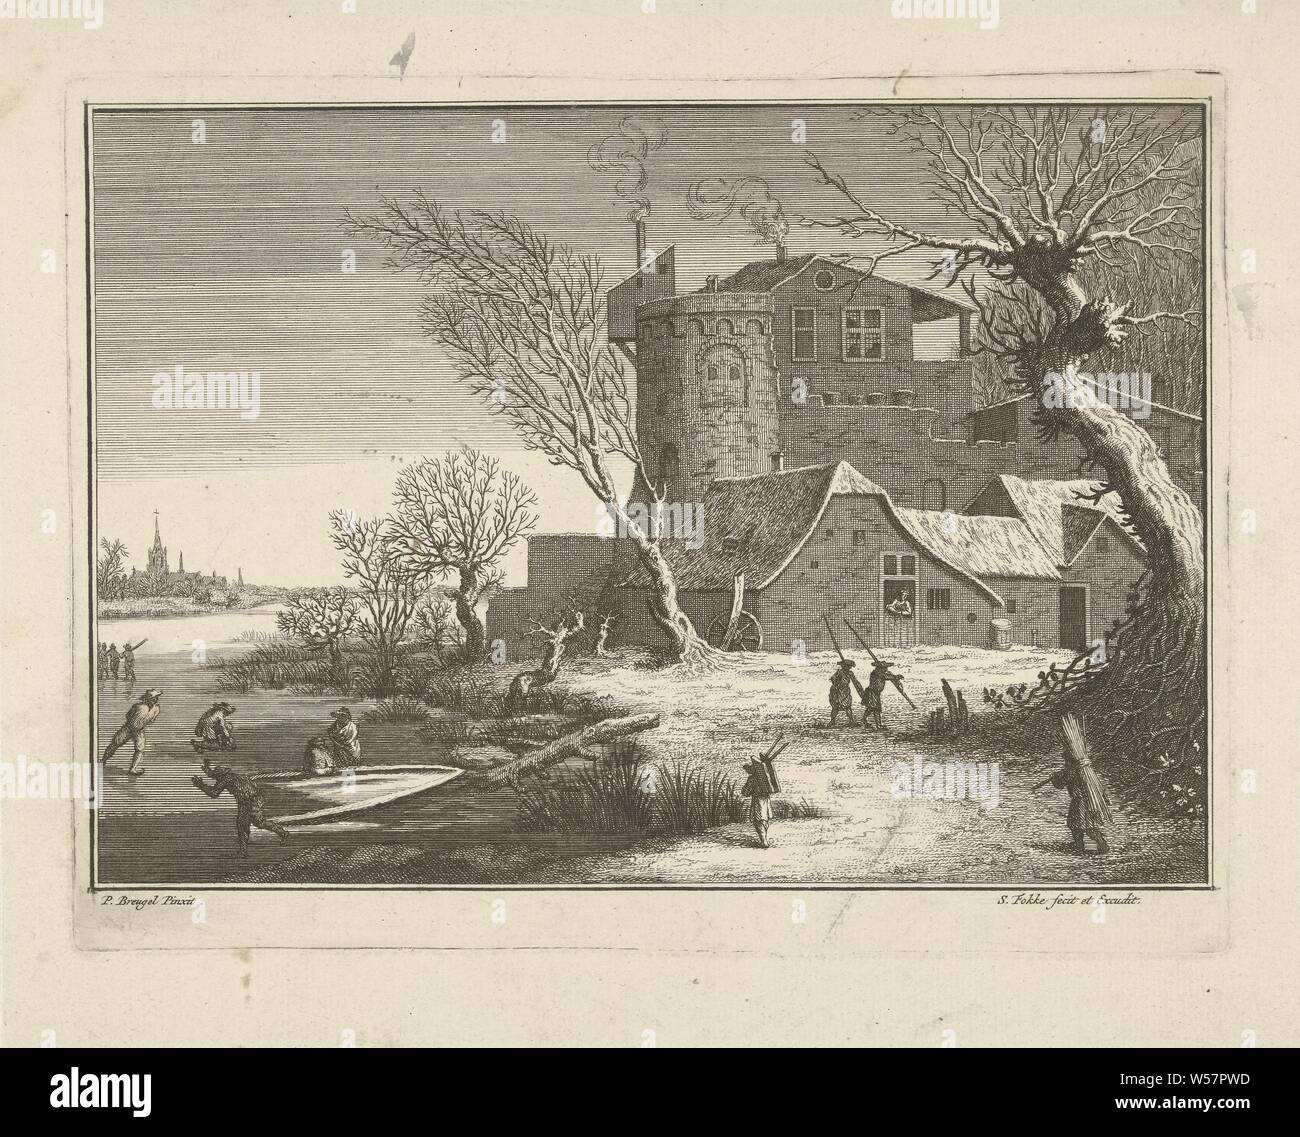 Winter landscape with skaters, Winter landscape with skaters. On the shore is a house with smoking chimneys., Winter landscape, landscape symbolizing winter (the four seasons of the year), skates (winter sports), Simon Fokke (mentioned on object), Amsterdam, 1722 - 1784, paper, etching, h 167 mm × w 220 mm Stock Photo